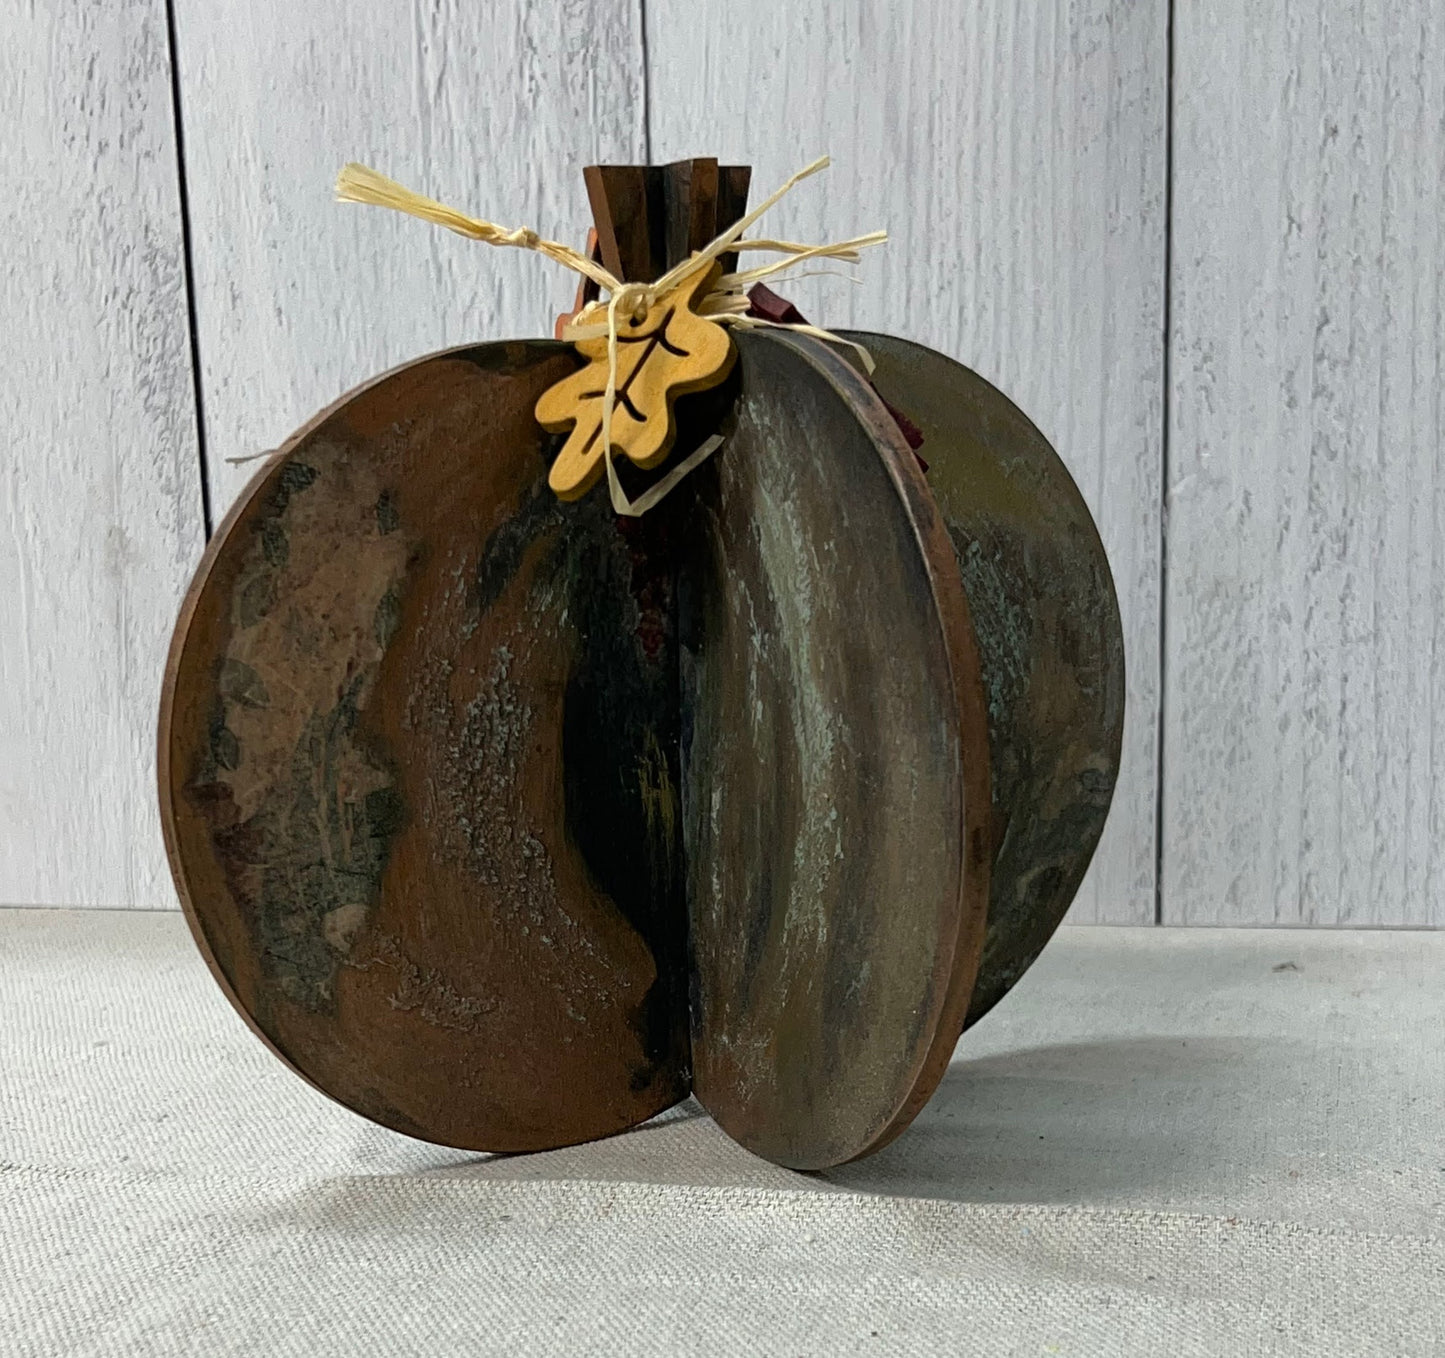 Creating Crusty Goodness on 3D Standing Pumpkins Using Mixed Media!